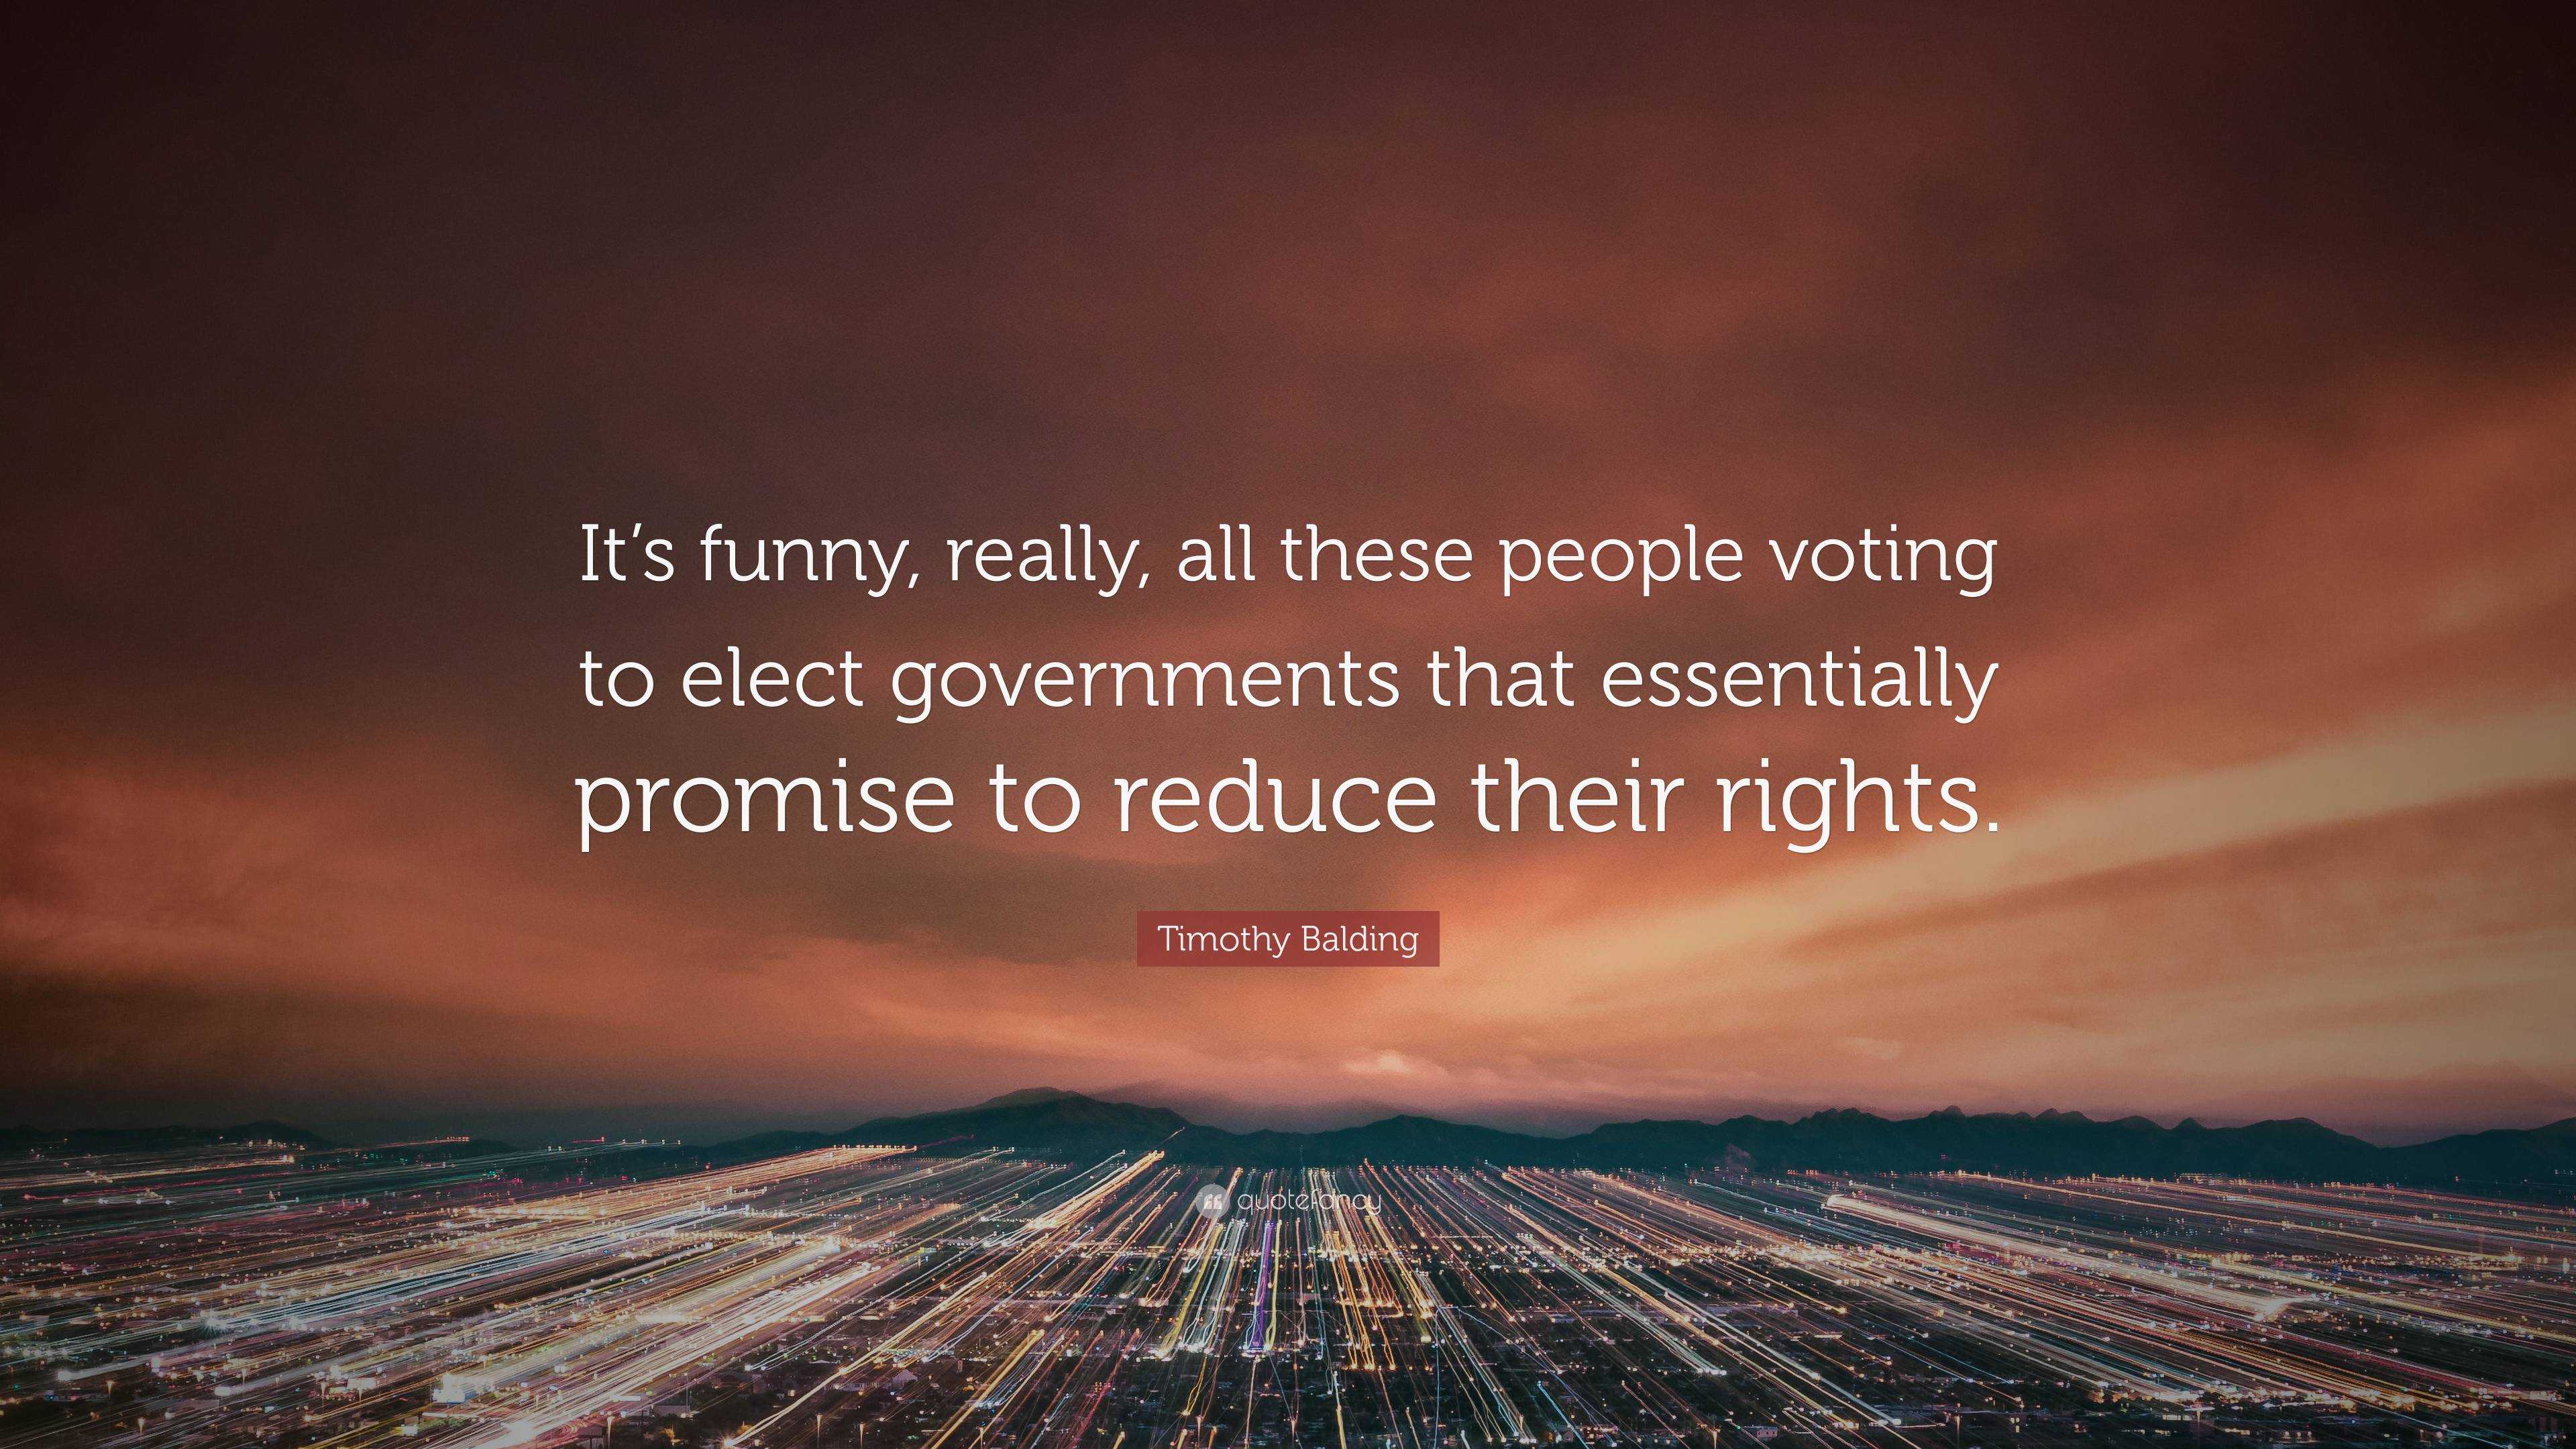 Timothy Balding Quote: “It's funny, really, all these people voting to  elect governments that essentially promise